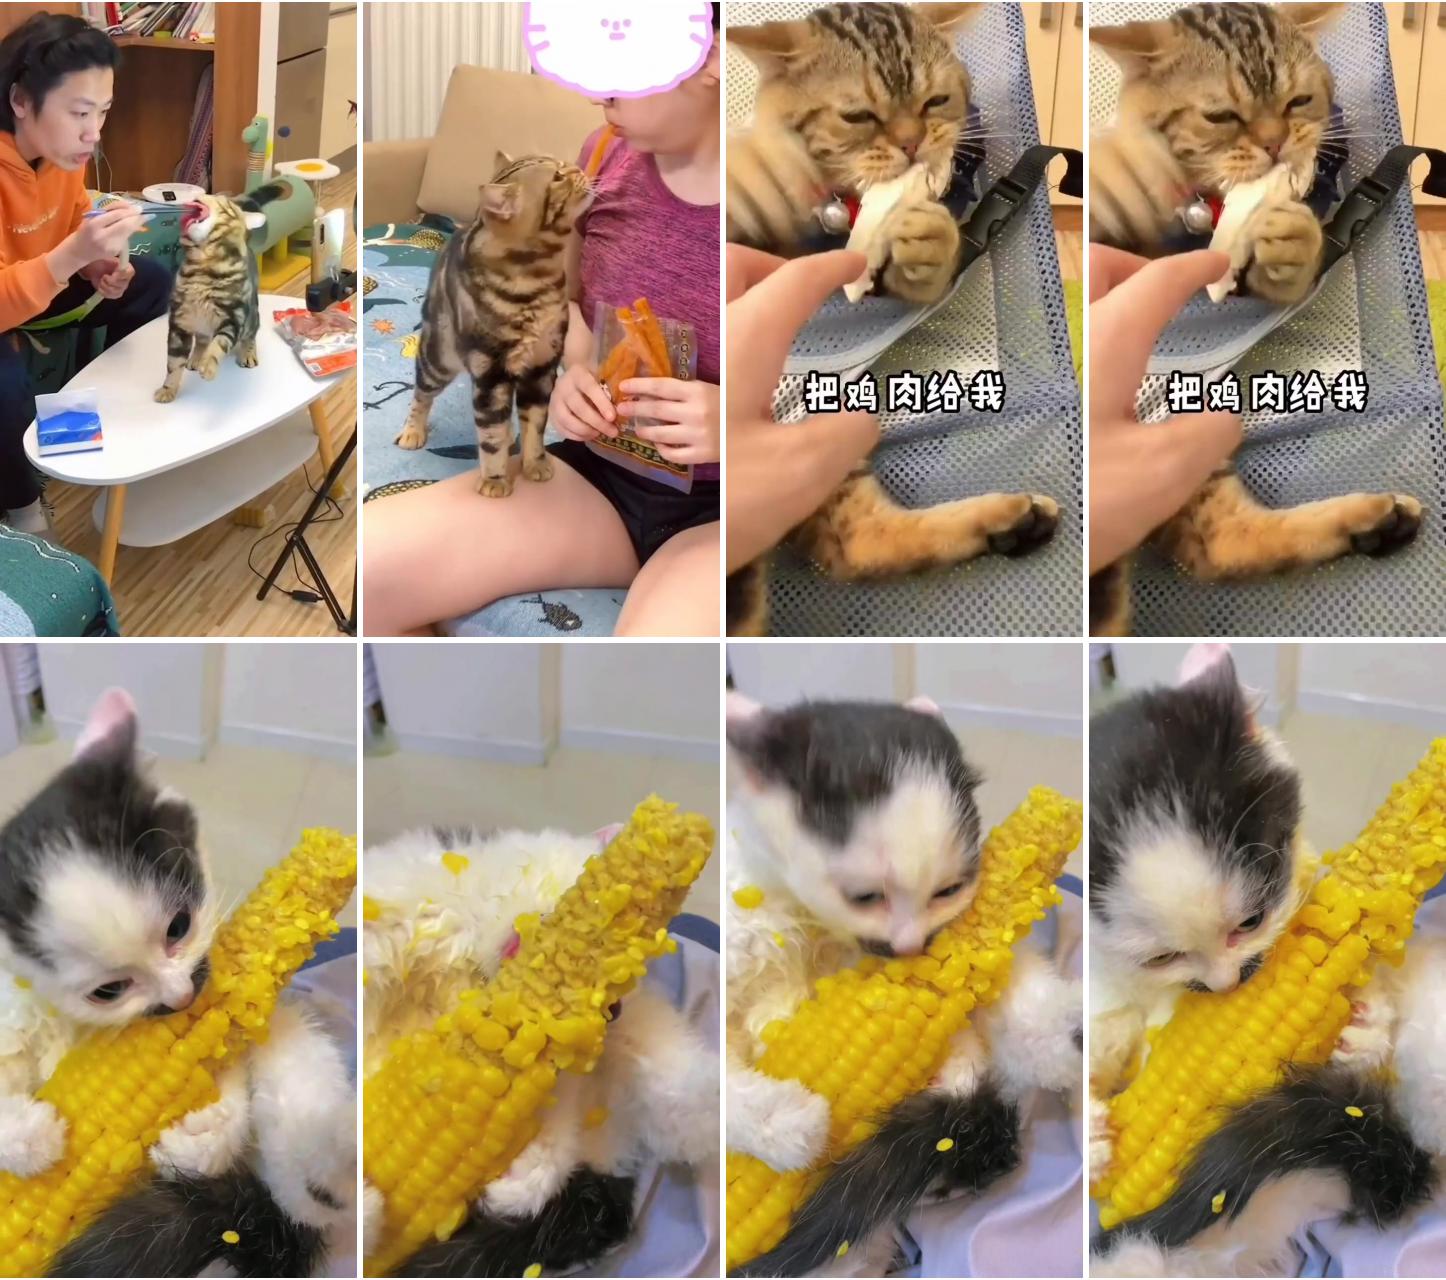 Whose cat likes to steal food like this haha; cat eating capacity